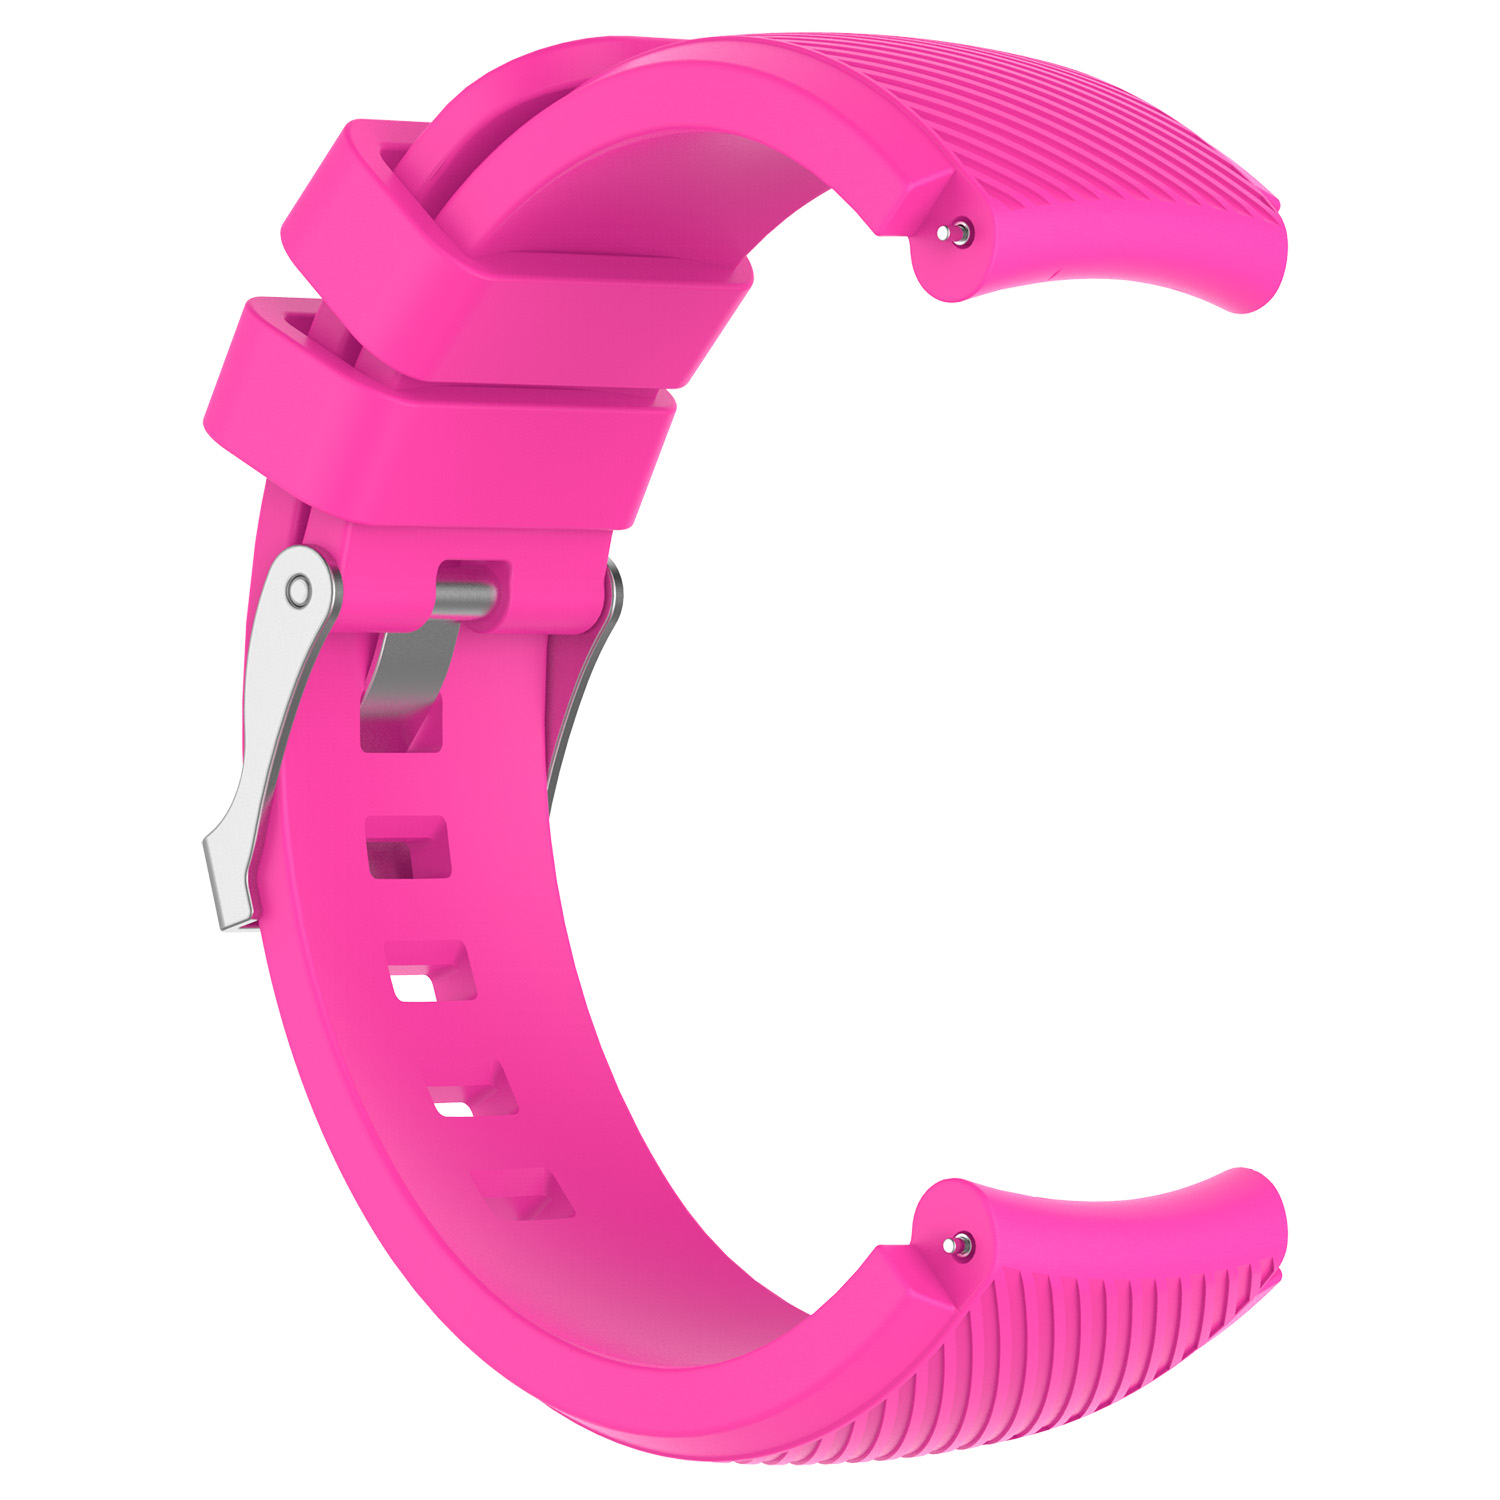 Bakeey-22mm-Universal-Watch-Band-Silicone-Watch-Strap-Replacement-for-HUAWEI-Watch-GT-1730954-13